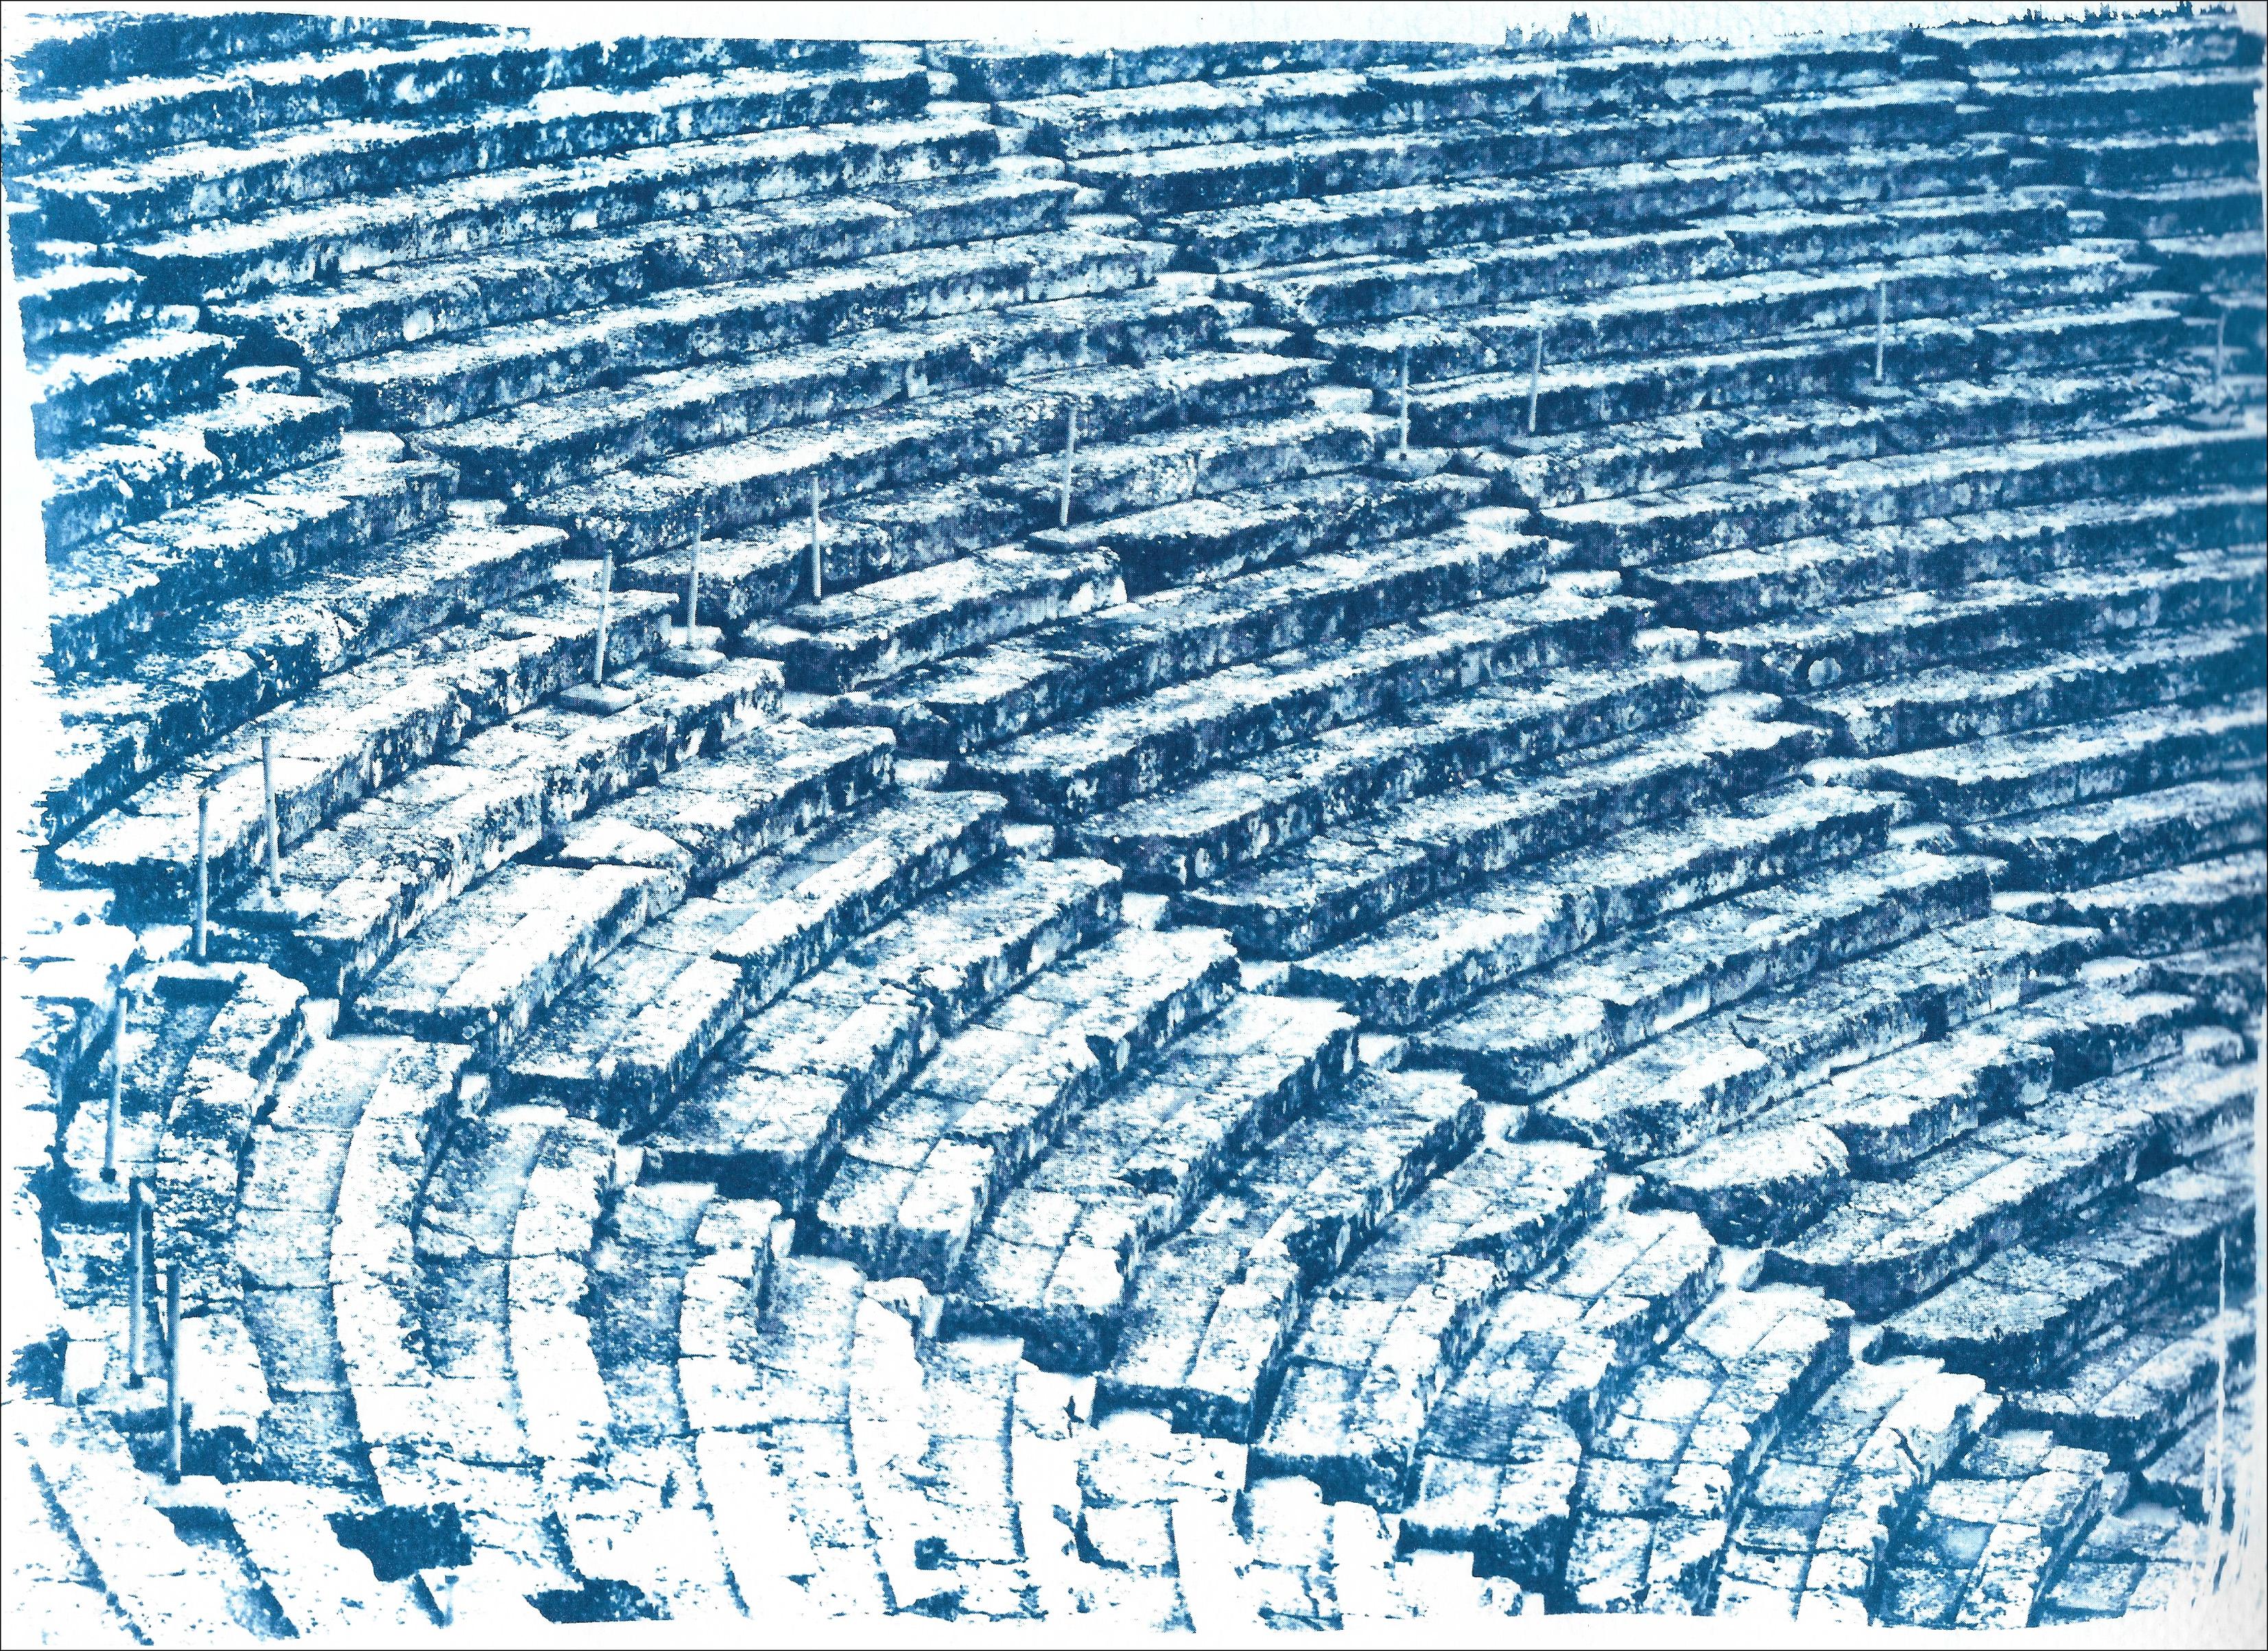 Diptych of Ancient Theatre, Multi-panel Cyanotype, Greek and Roman Architecture - Blue Landscape Photograph by Kind of Cyan